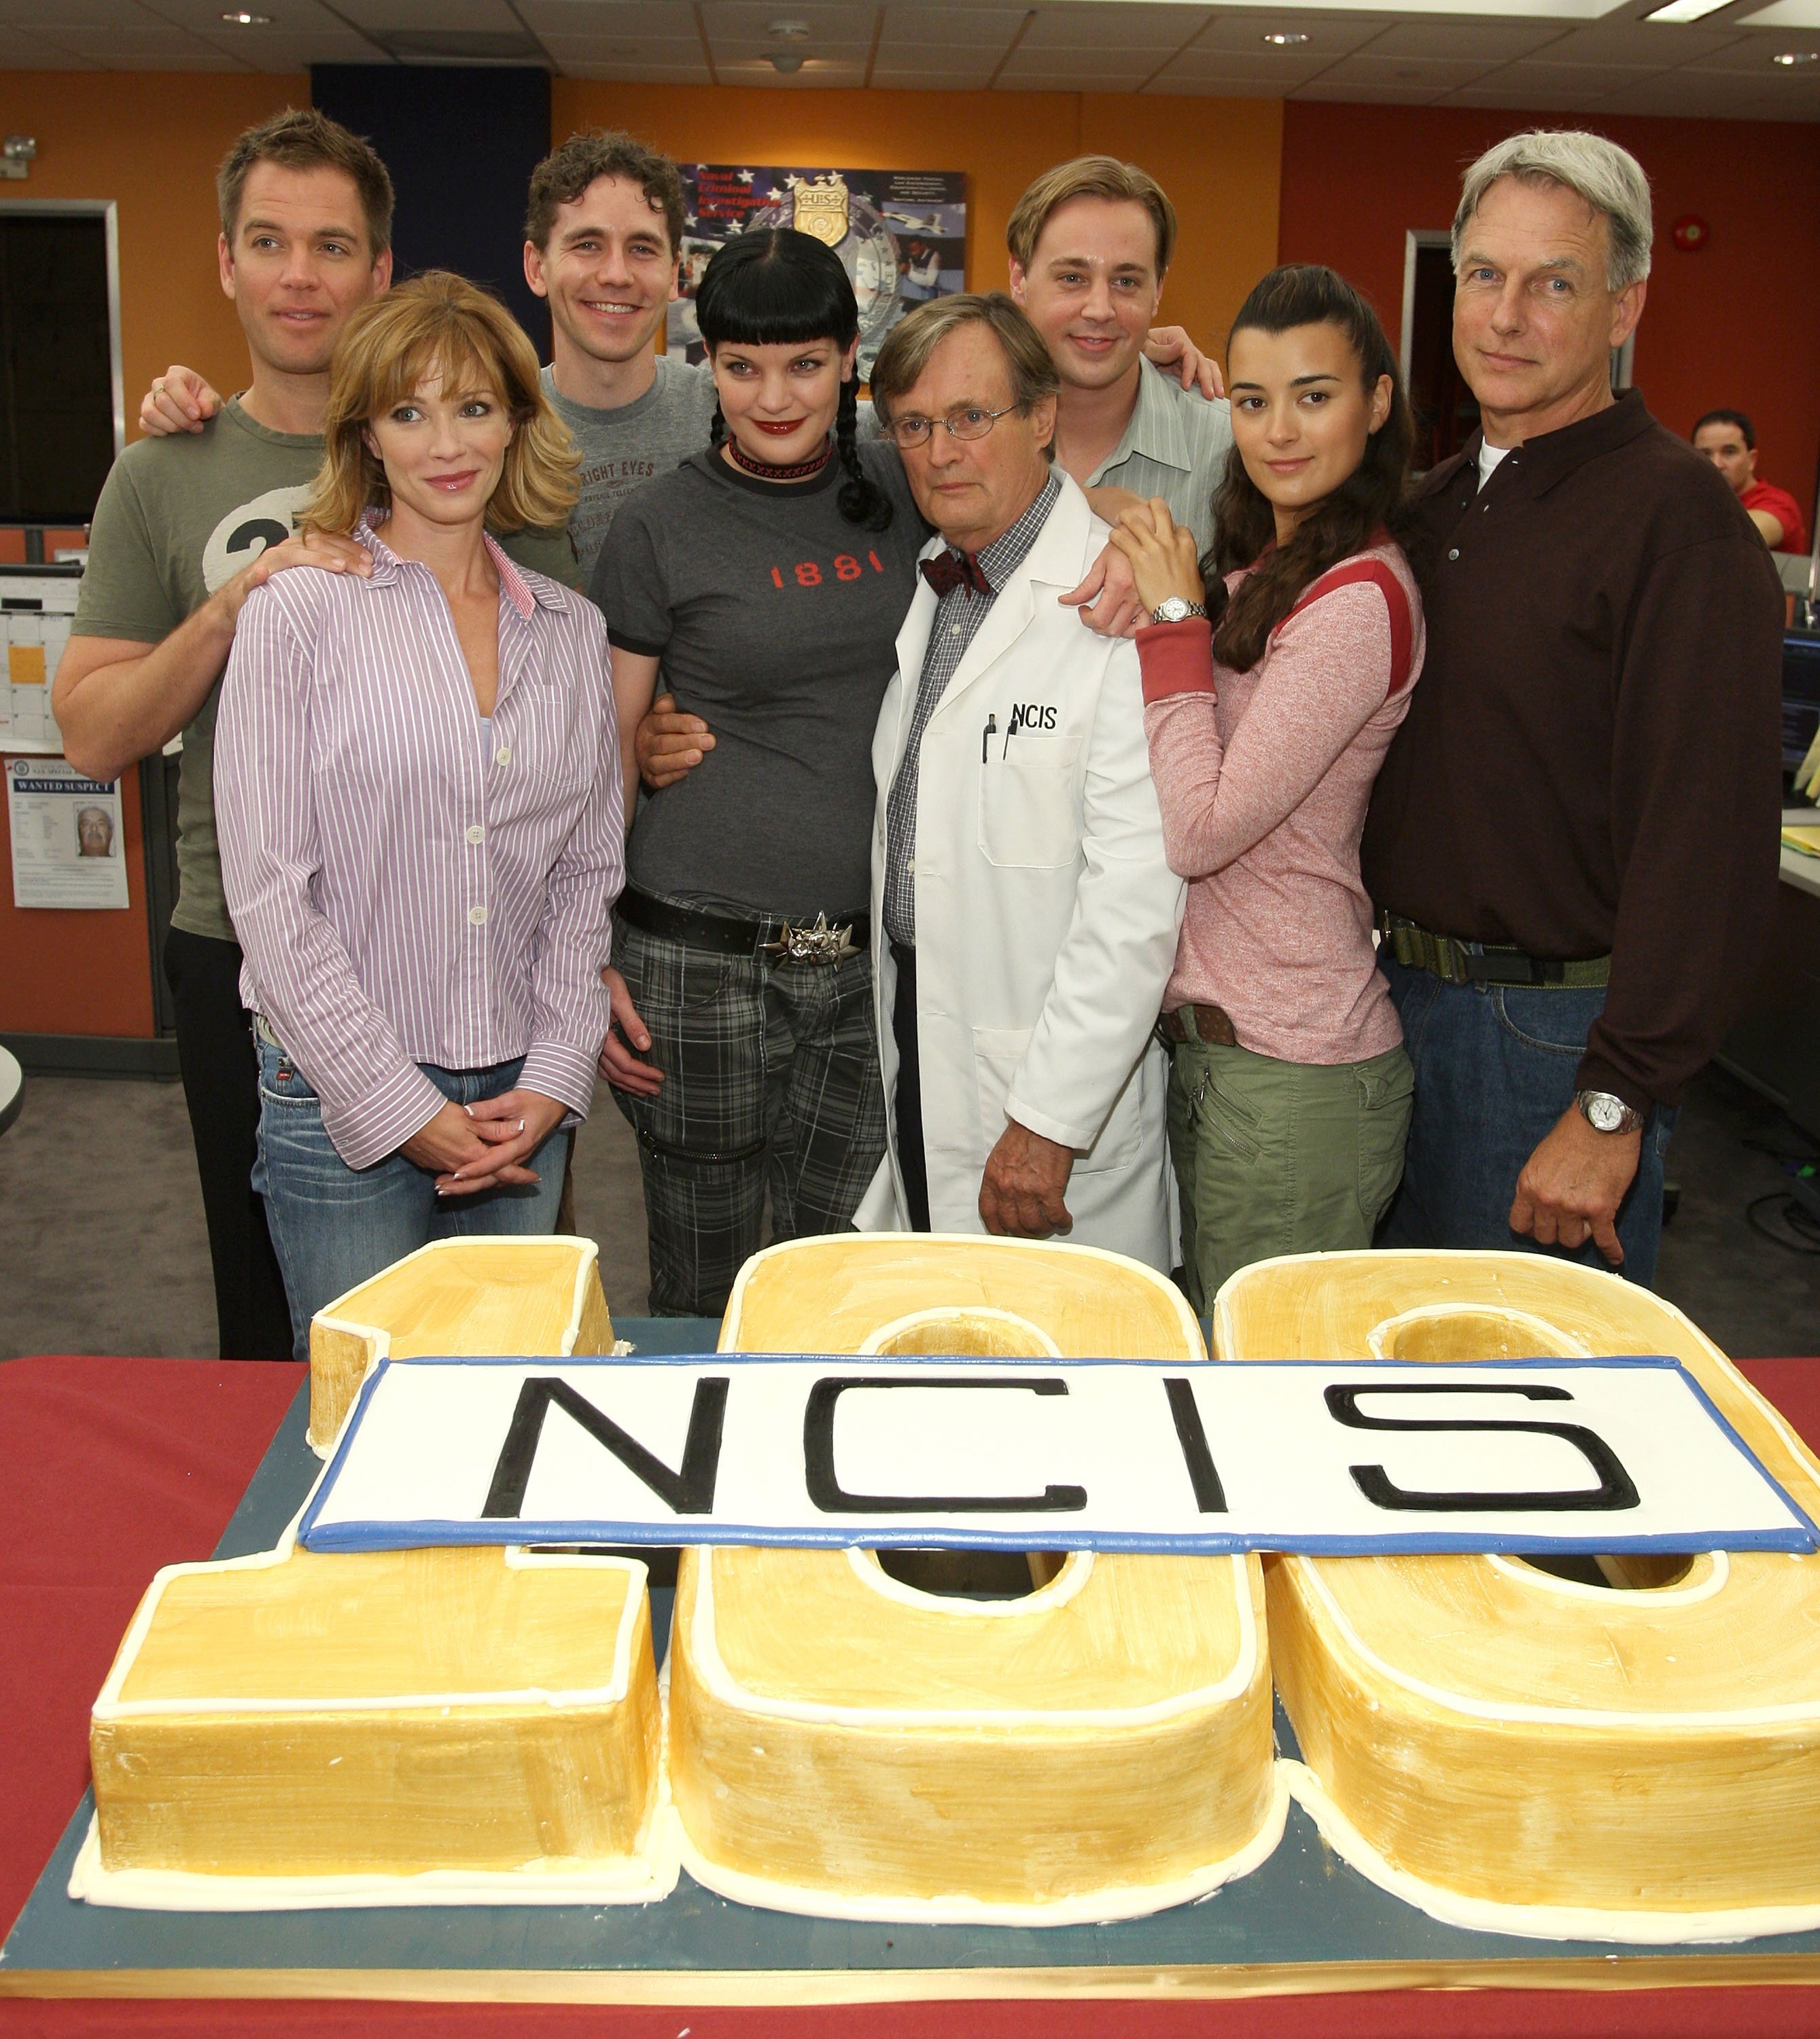 The cast of "NCIS" celebrating 100 episodes of the show with a large cake. 2007, California. | Photo: Getty Images